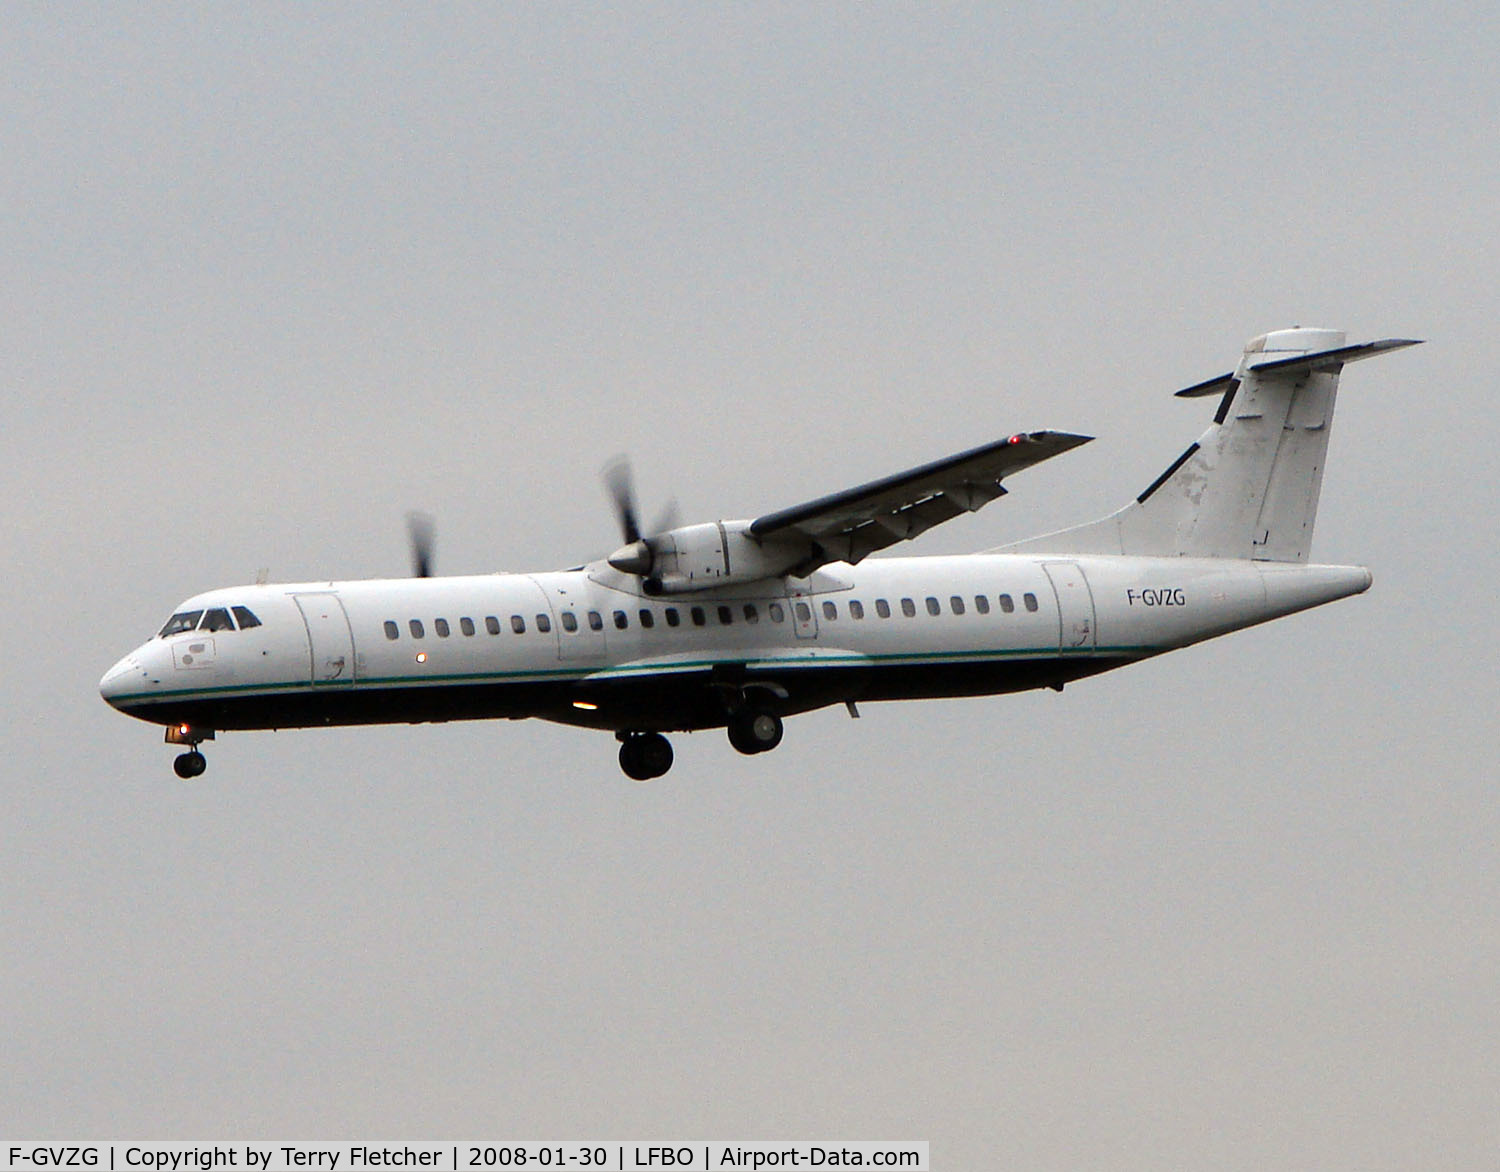 F-GVZG, 1989 ATR 72-201 C/N 145, Untitled ATR72 making approach to Toulouse in January 2008